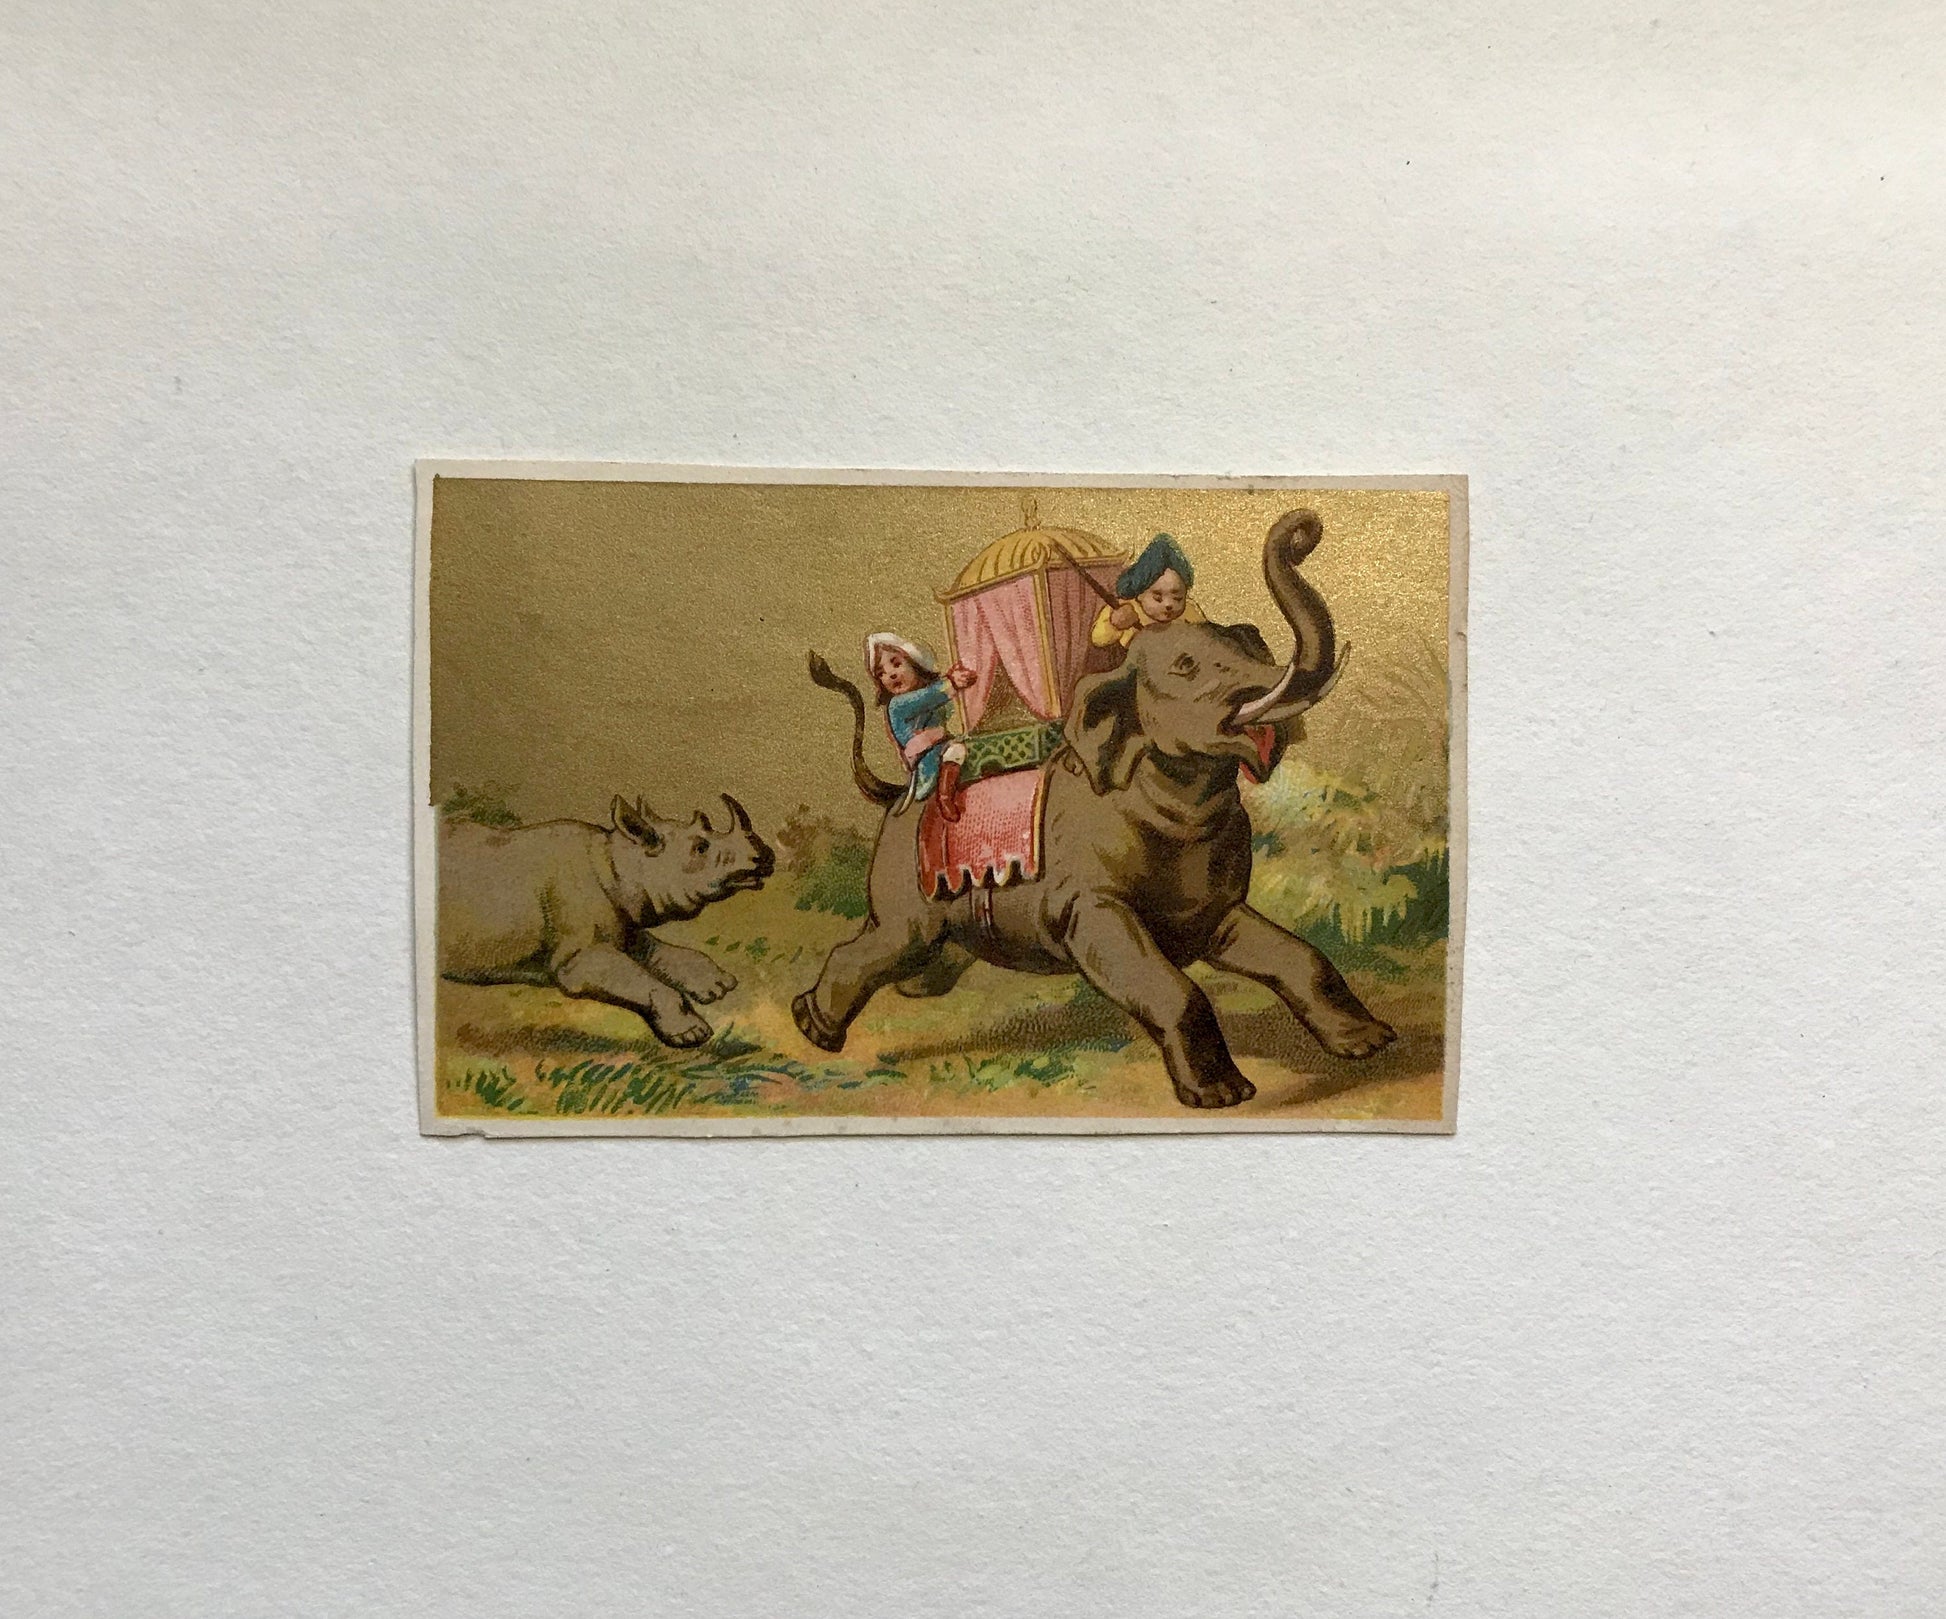 A Set of 6 French Trade Cards. Featuring the adventures of three mahouts and an elephant. Late 19th century. Size: 10 x 6.4 cms.